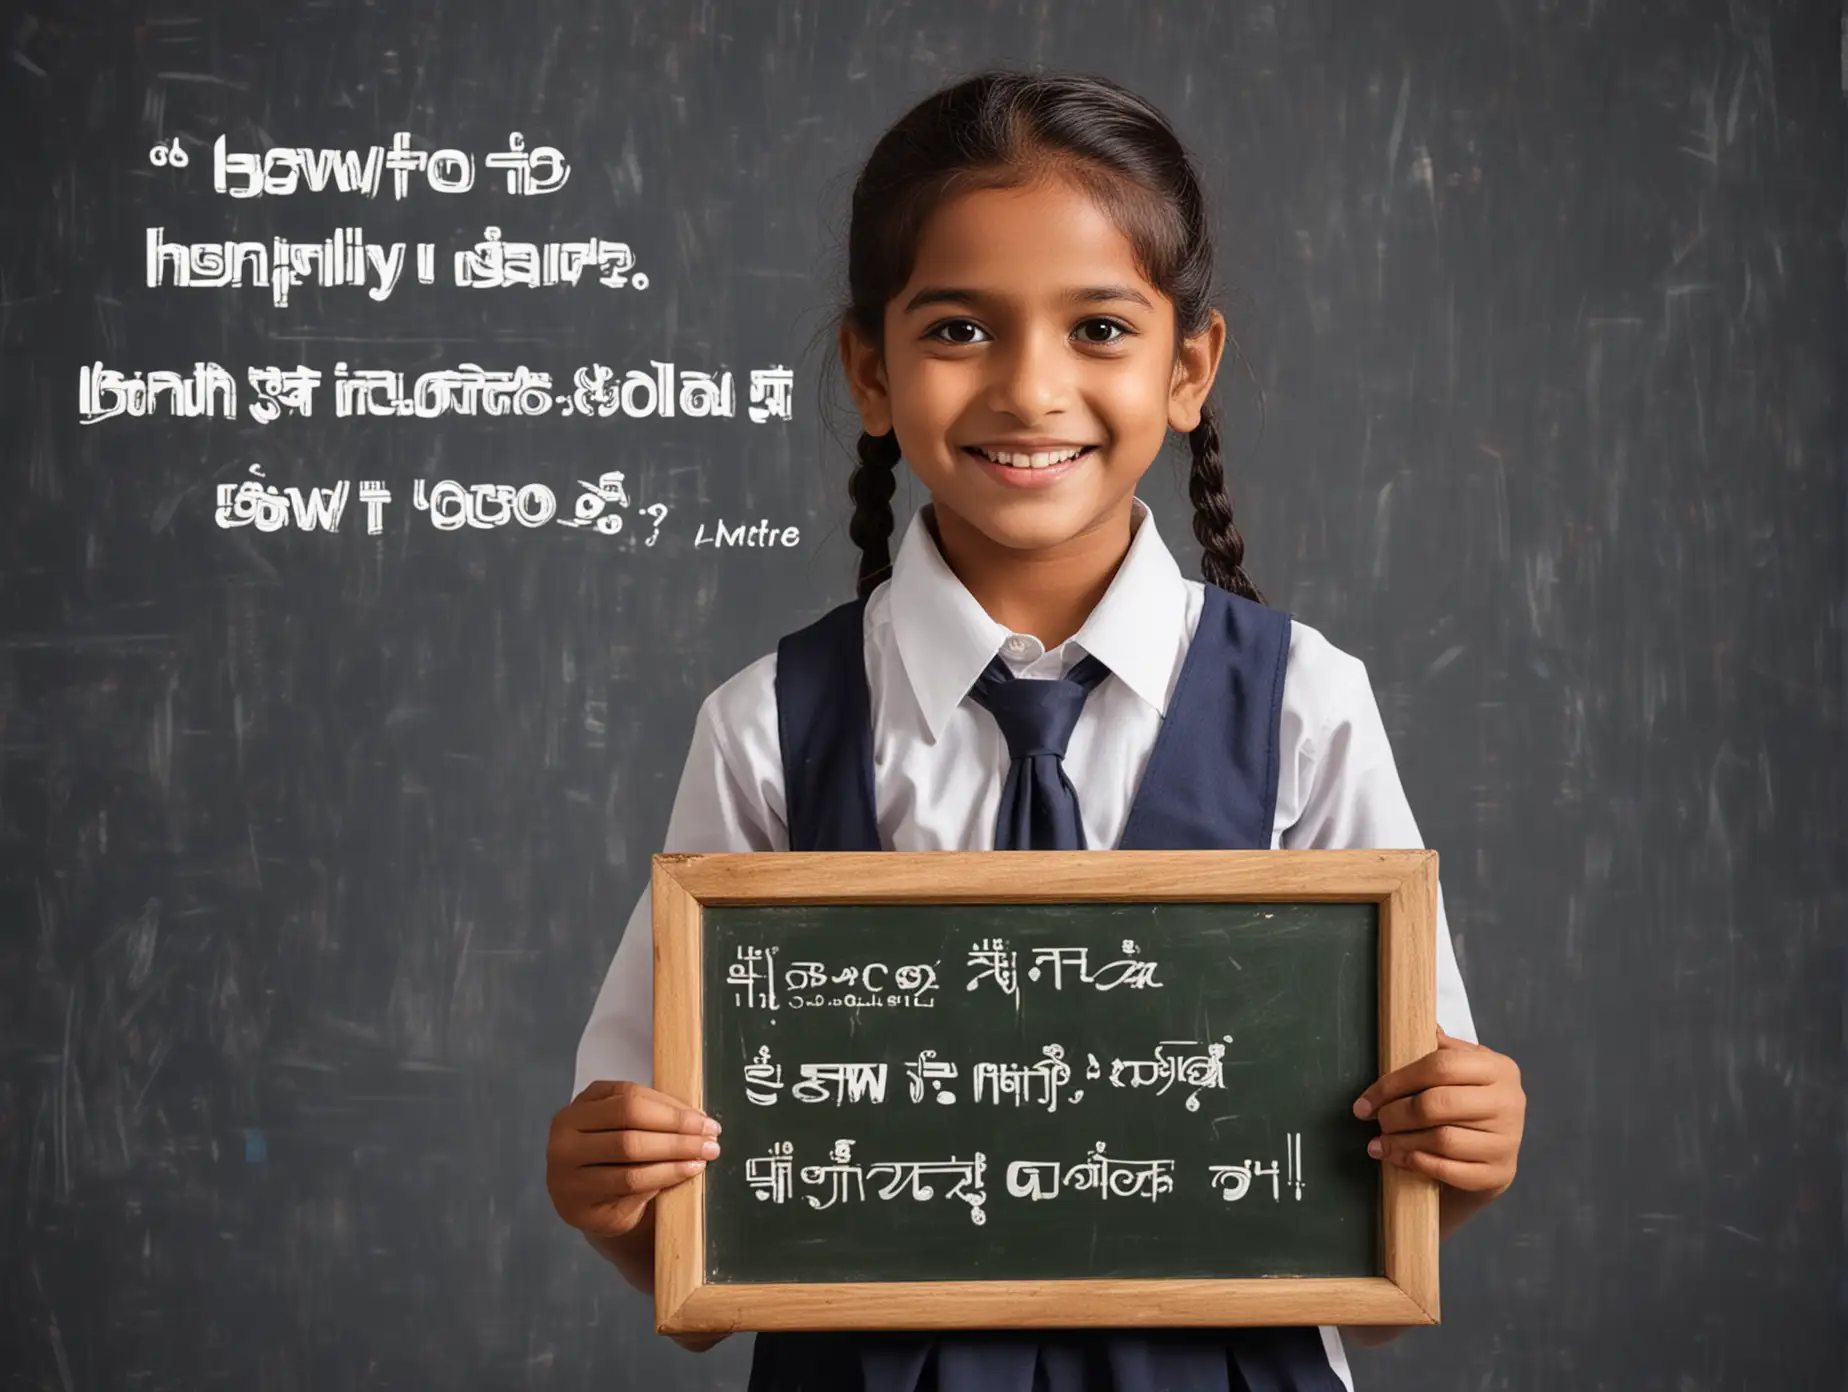 A Indian child wearing school uniform, holding a board, smiling happily. The board is clearly written in bold font, ‘HOW TO LEARNING HAPPILY GO&FIND ODA’